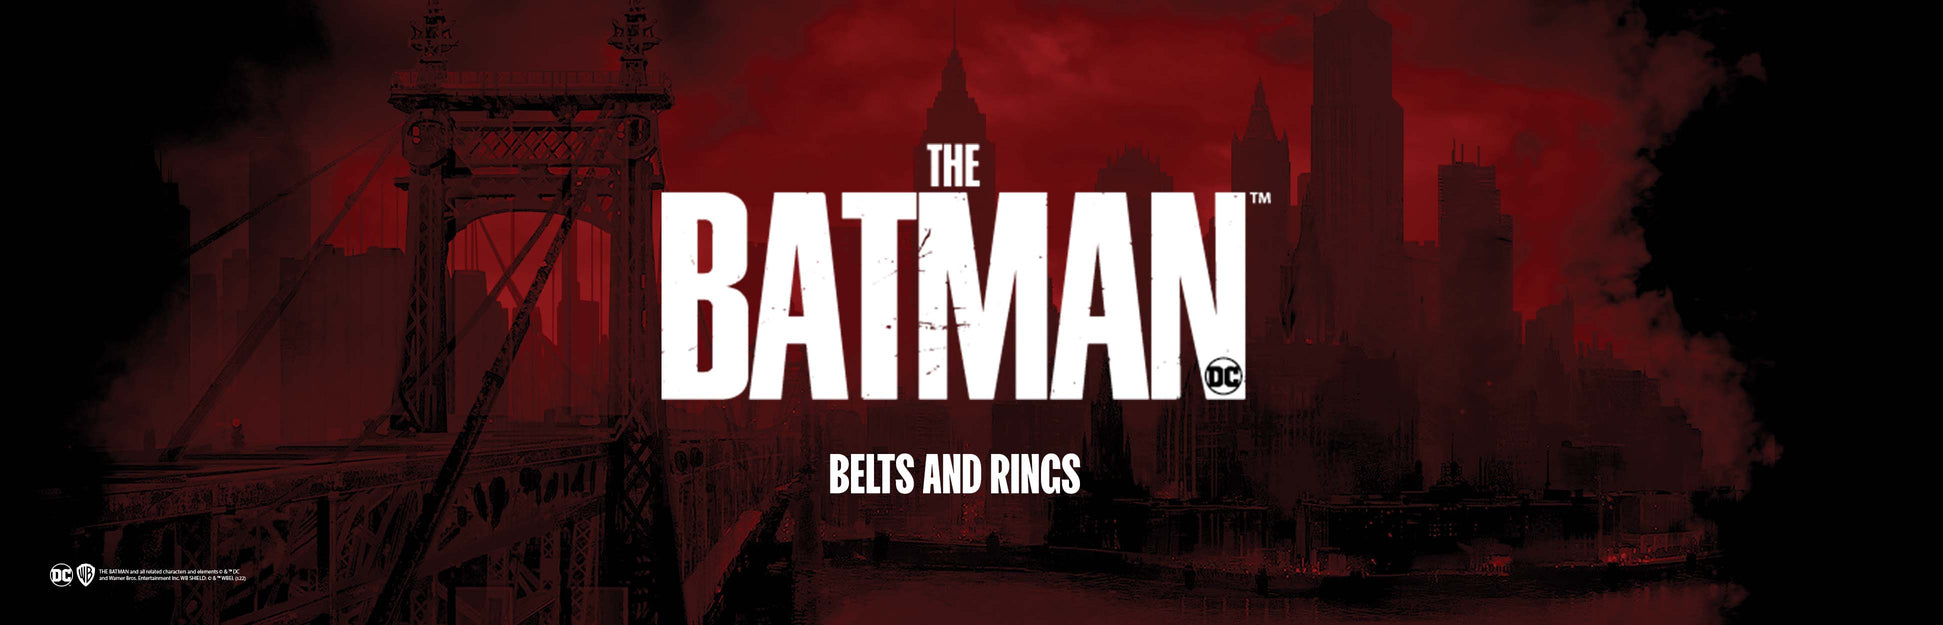 THE BATMAN, RINGS AND BELTS